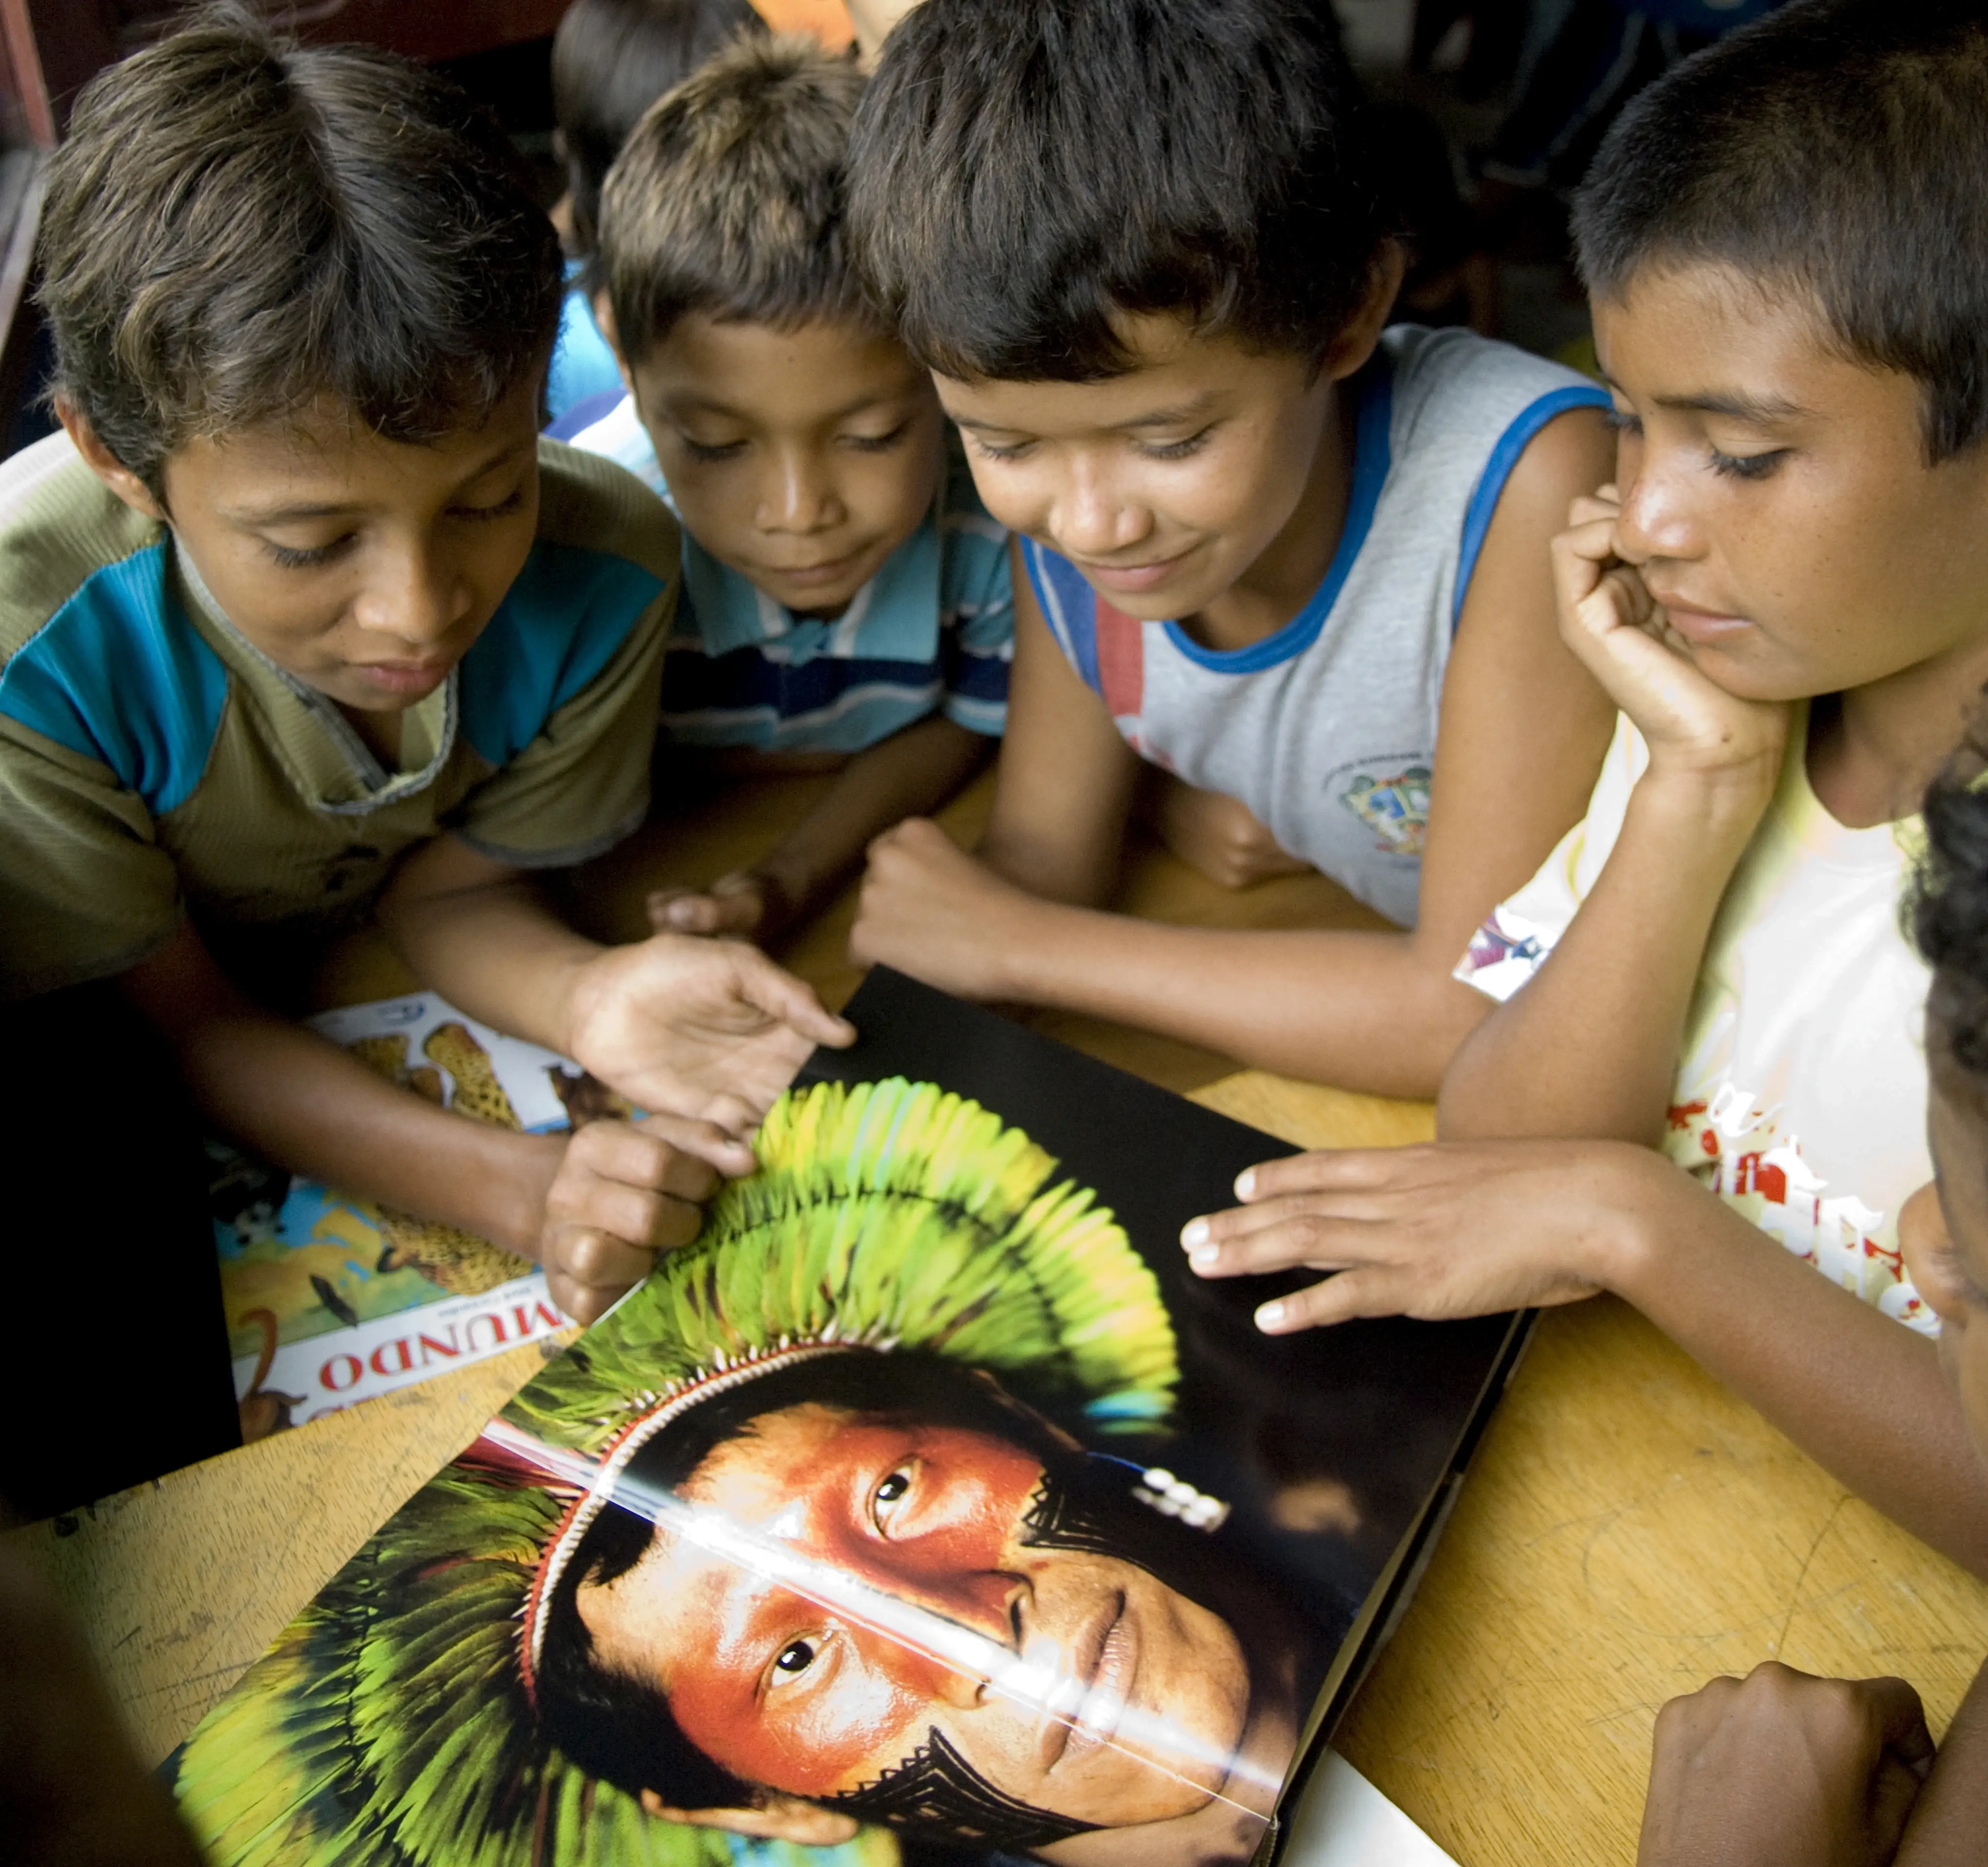 Children around the image of an indigenous person at a table